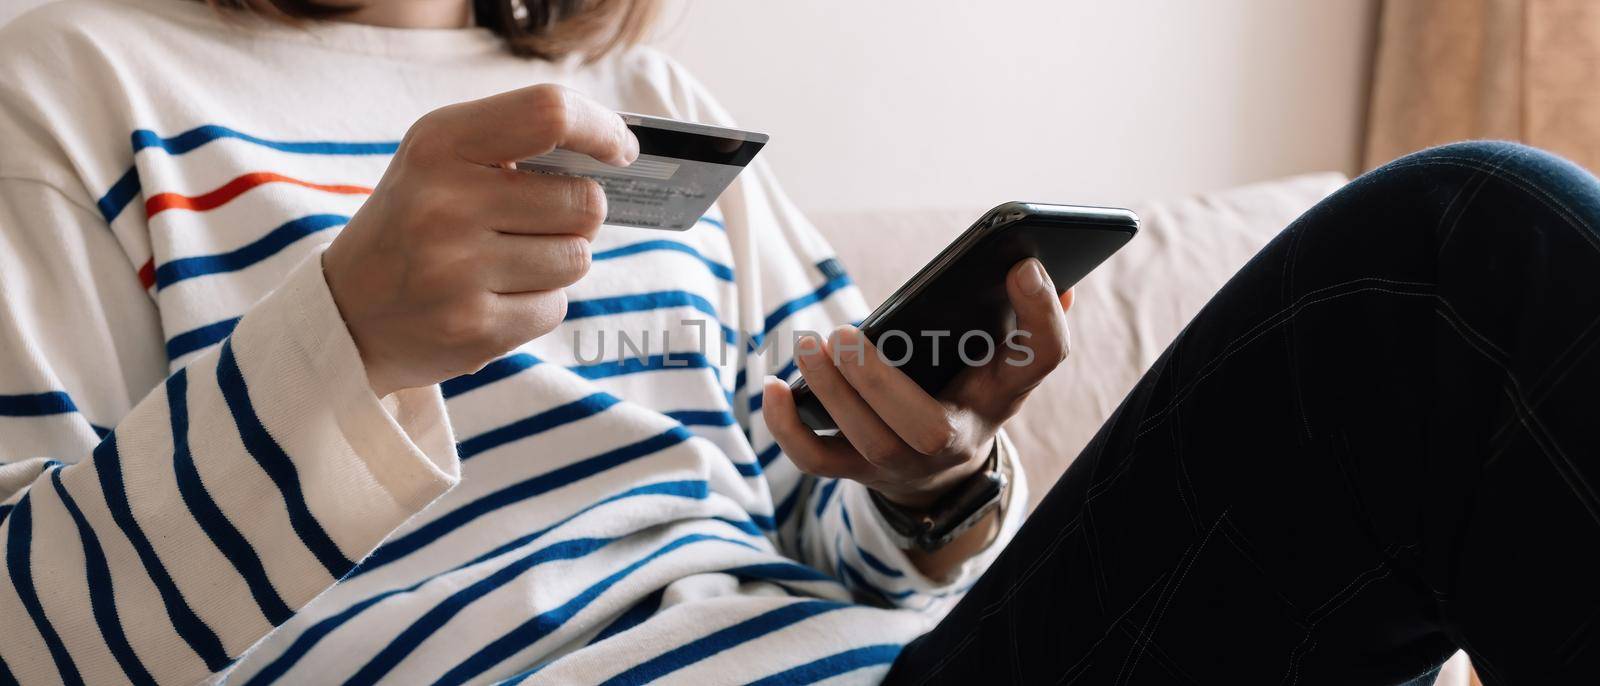 Online shopping payment,Woman's hands holding a smart phone and credit card and for online shopping at home by nateemee